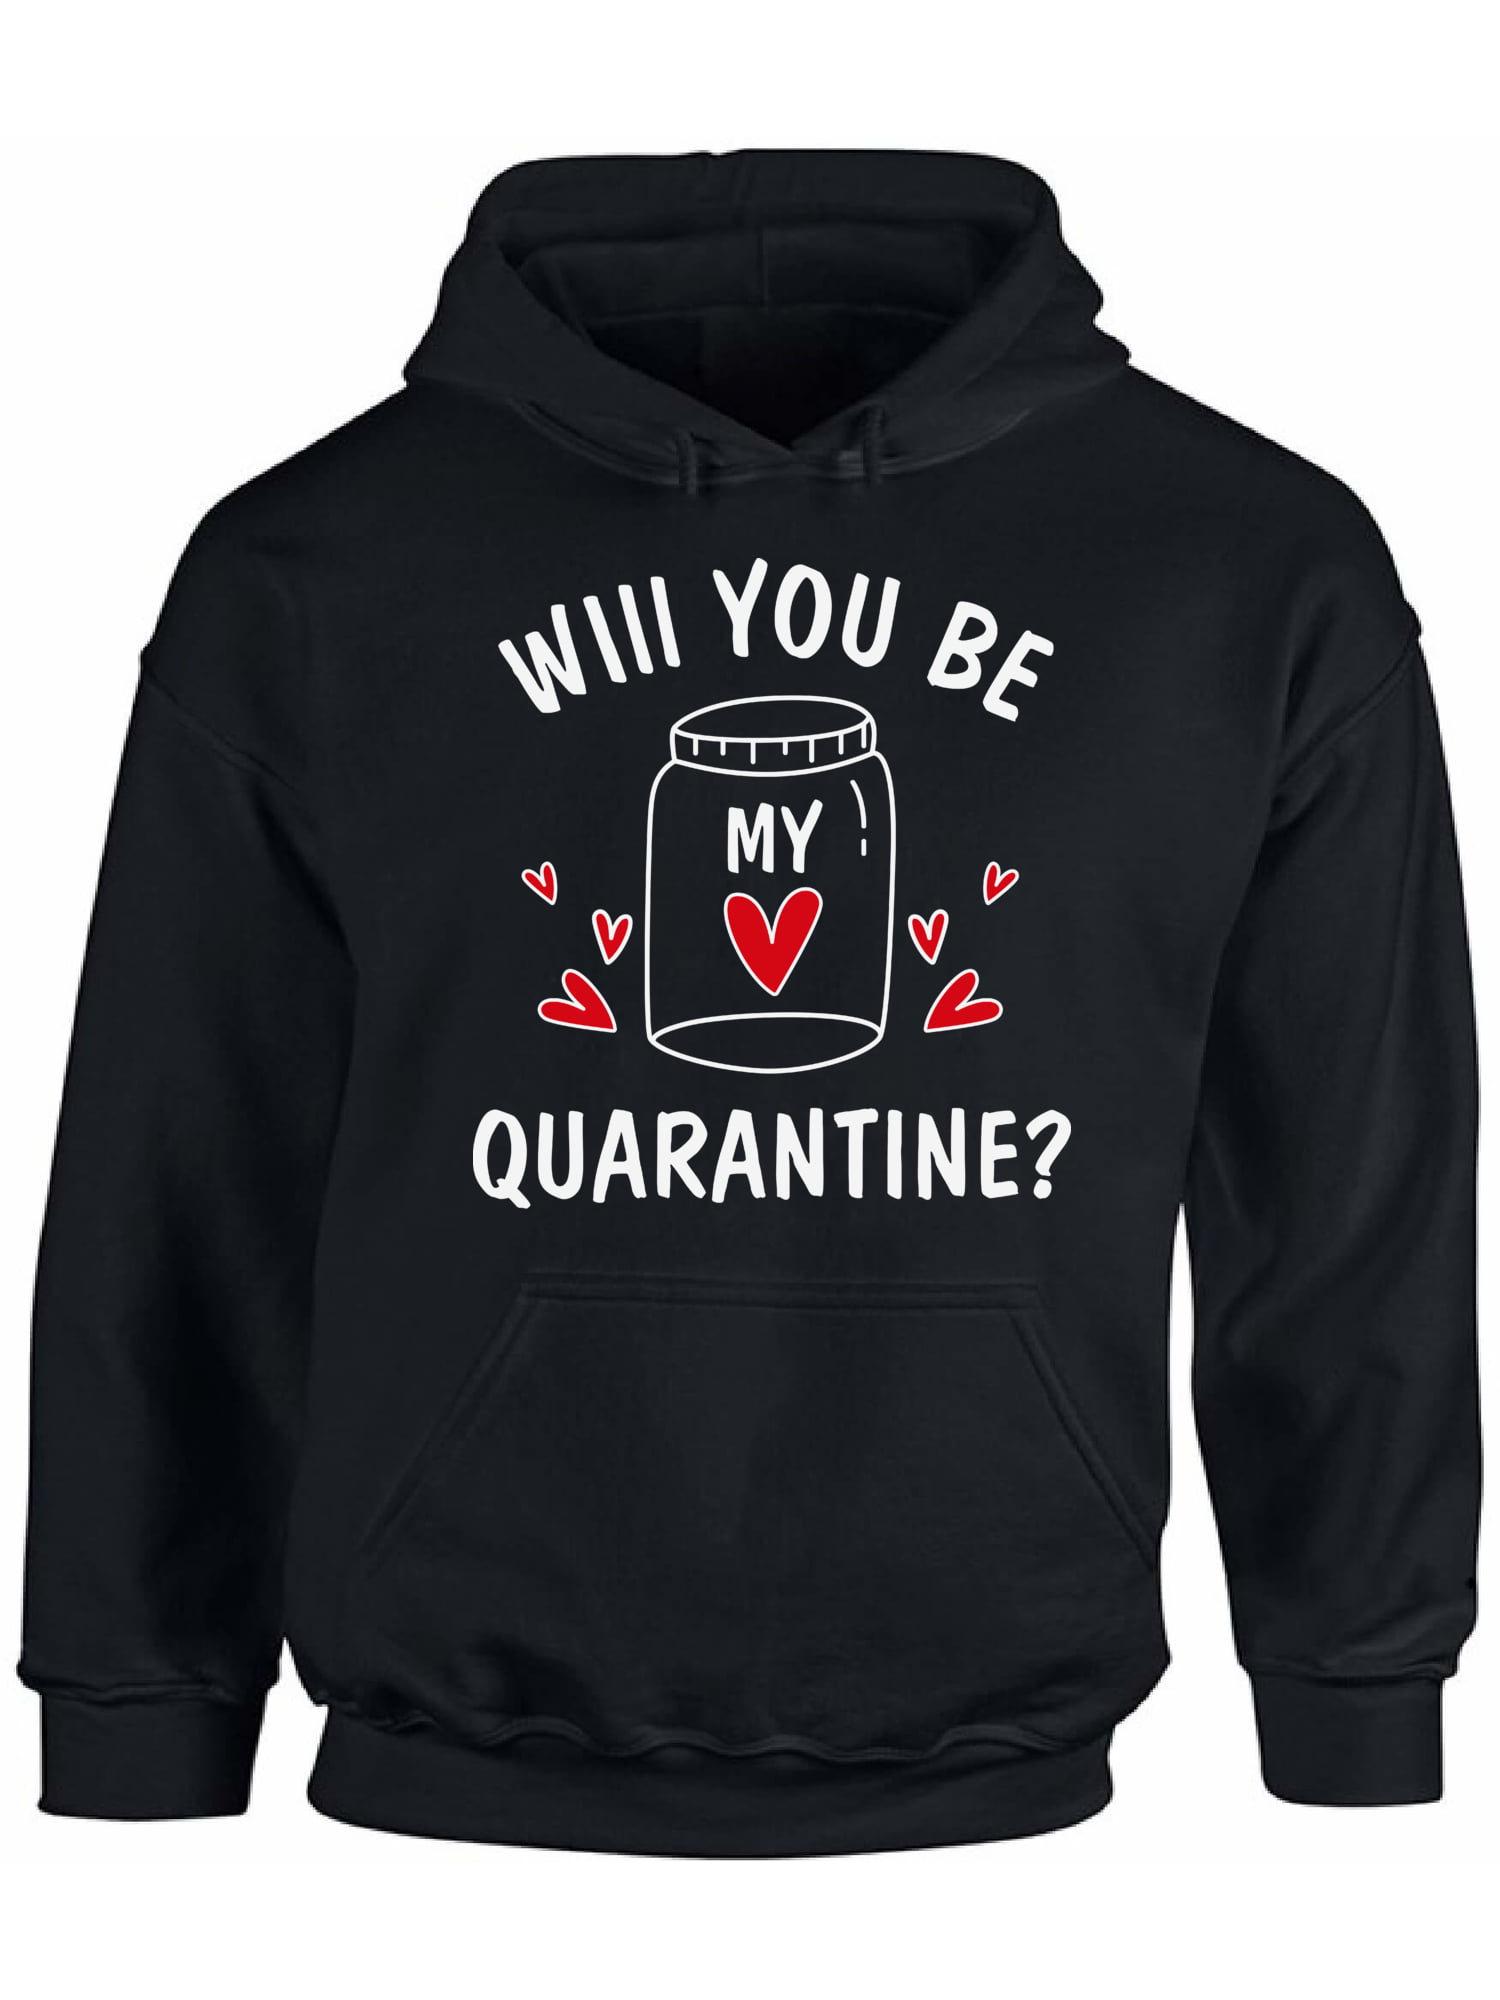 Will You Be My Valentine Sweatshirt Funny Offensive Humor Attitude Sweater